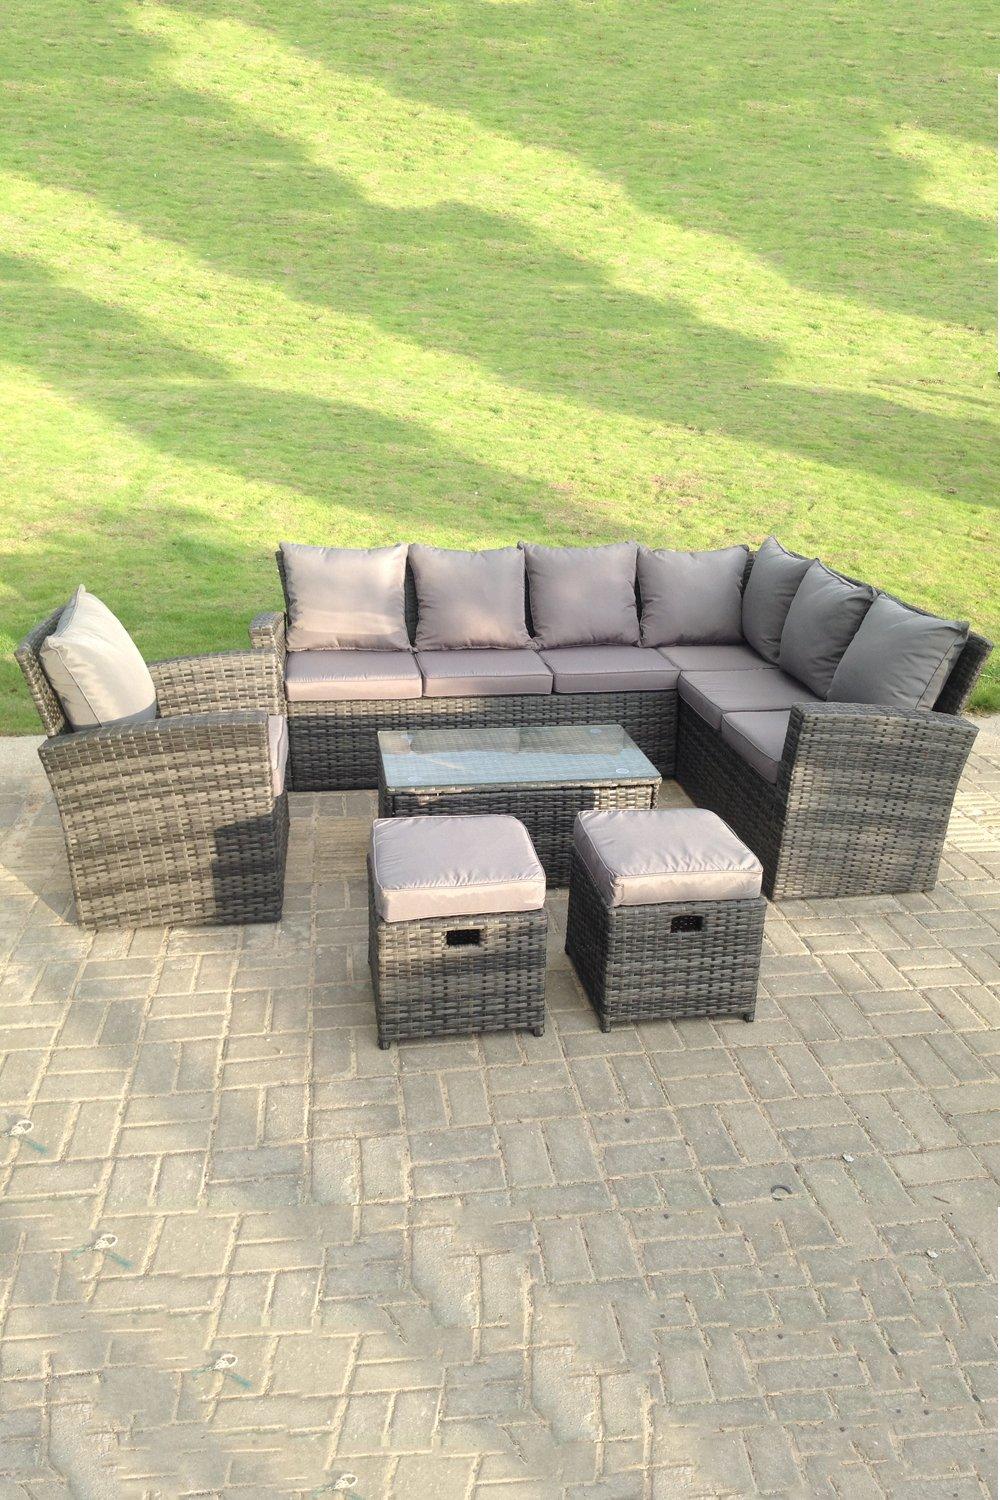 9 Seater High Back Rattan Set Corner Sofa With Oblong Coffee Table Stools With Chair